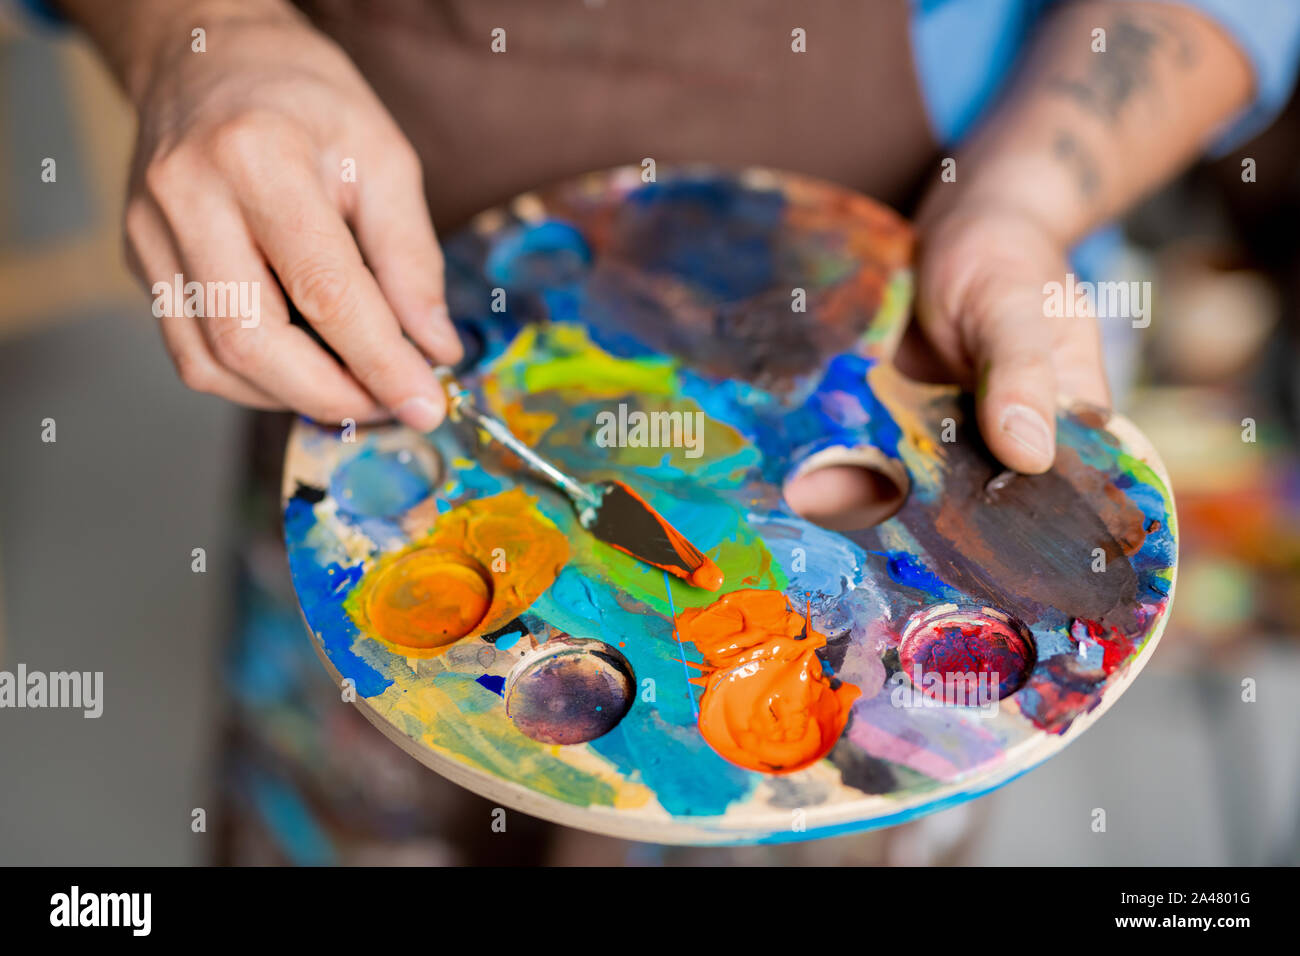 Hand of painter mixing paints on palette with small instrument before painting Stock Photo